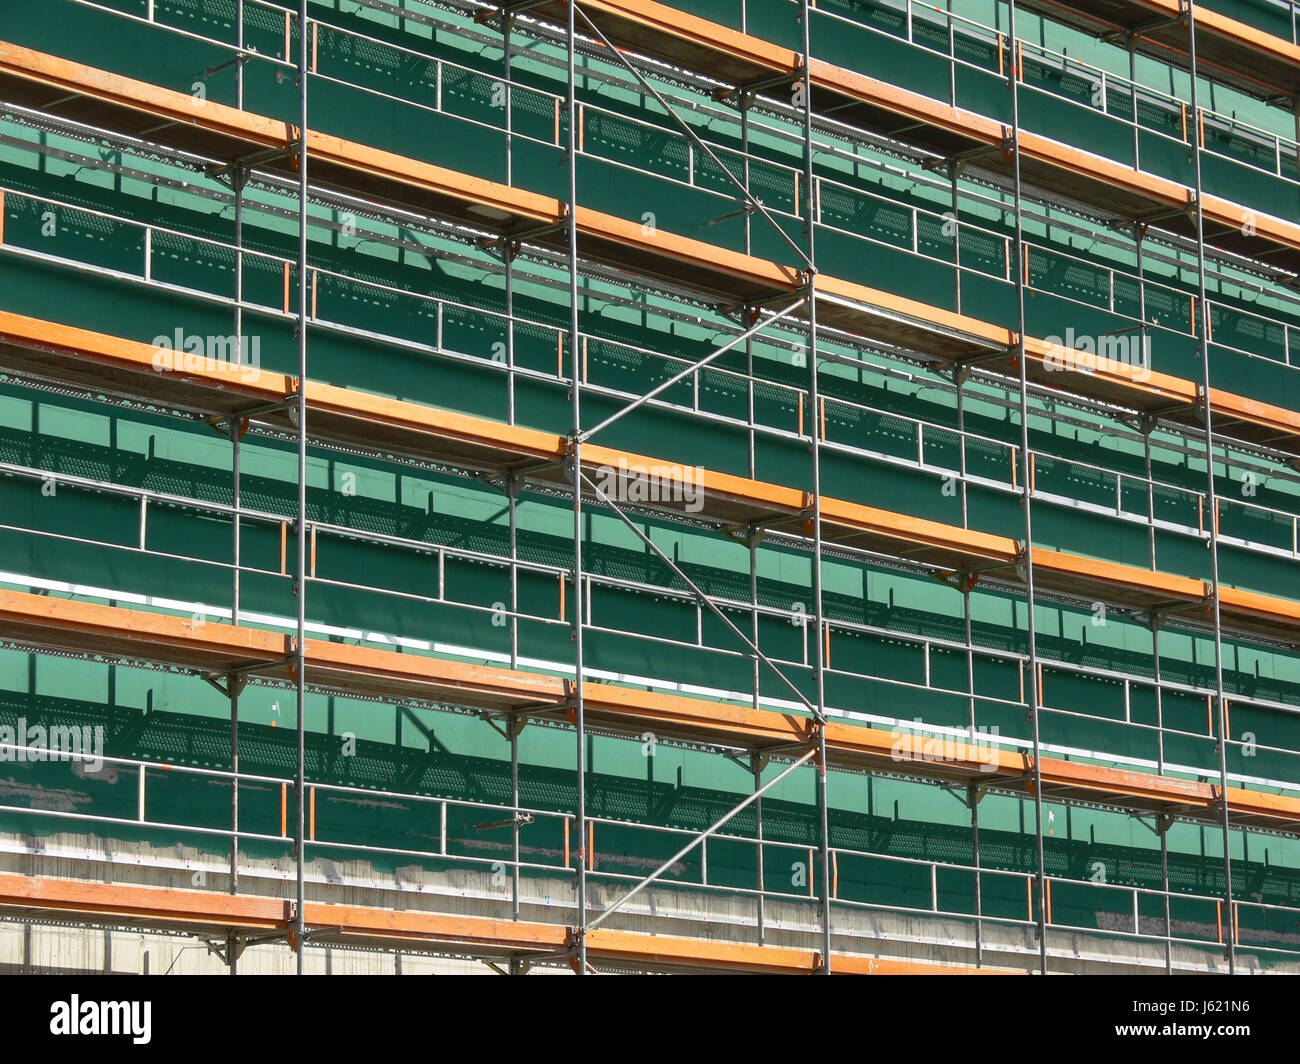 style of construction architecture architectural style scaffold scaffolding Stock Photo